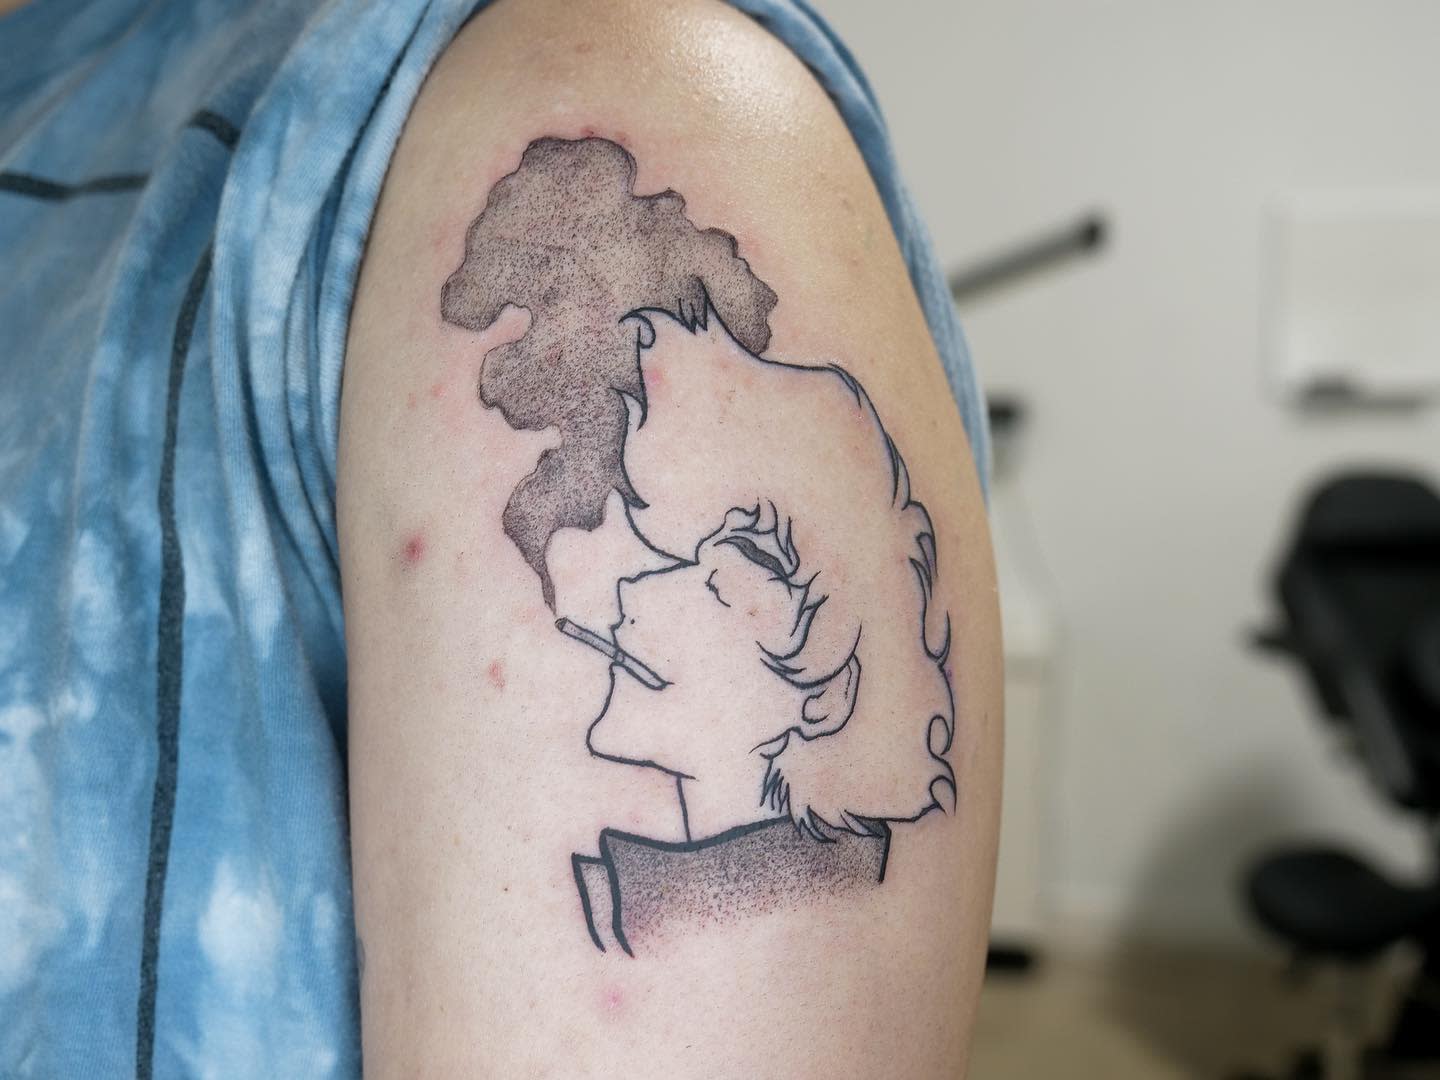 Ive been thinking about getting this tattoo for a while now but have it  facing the other way I scheduled an appointment for next week and want to  hear any thoughts before